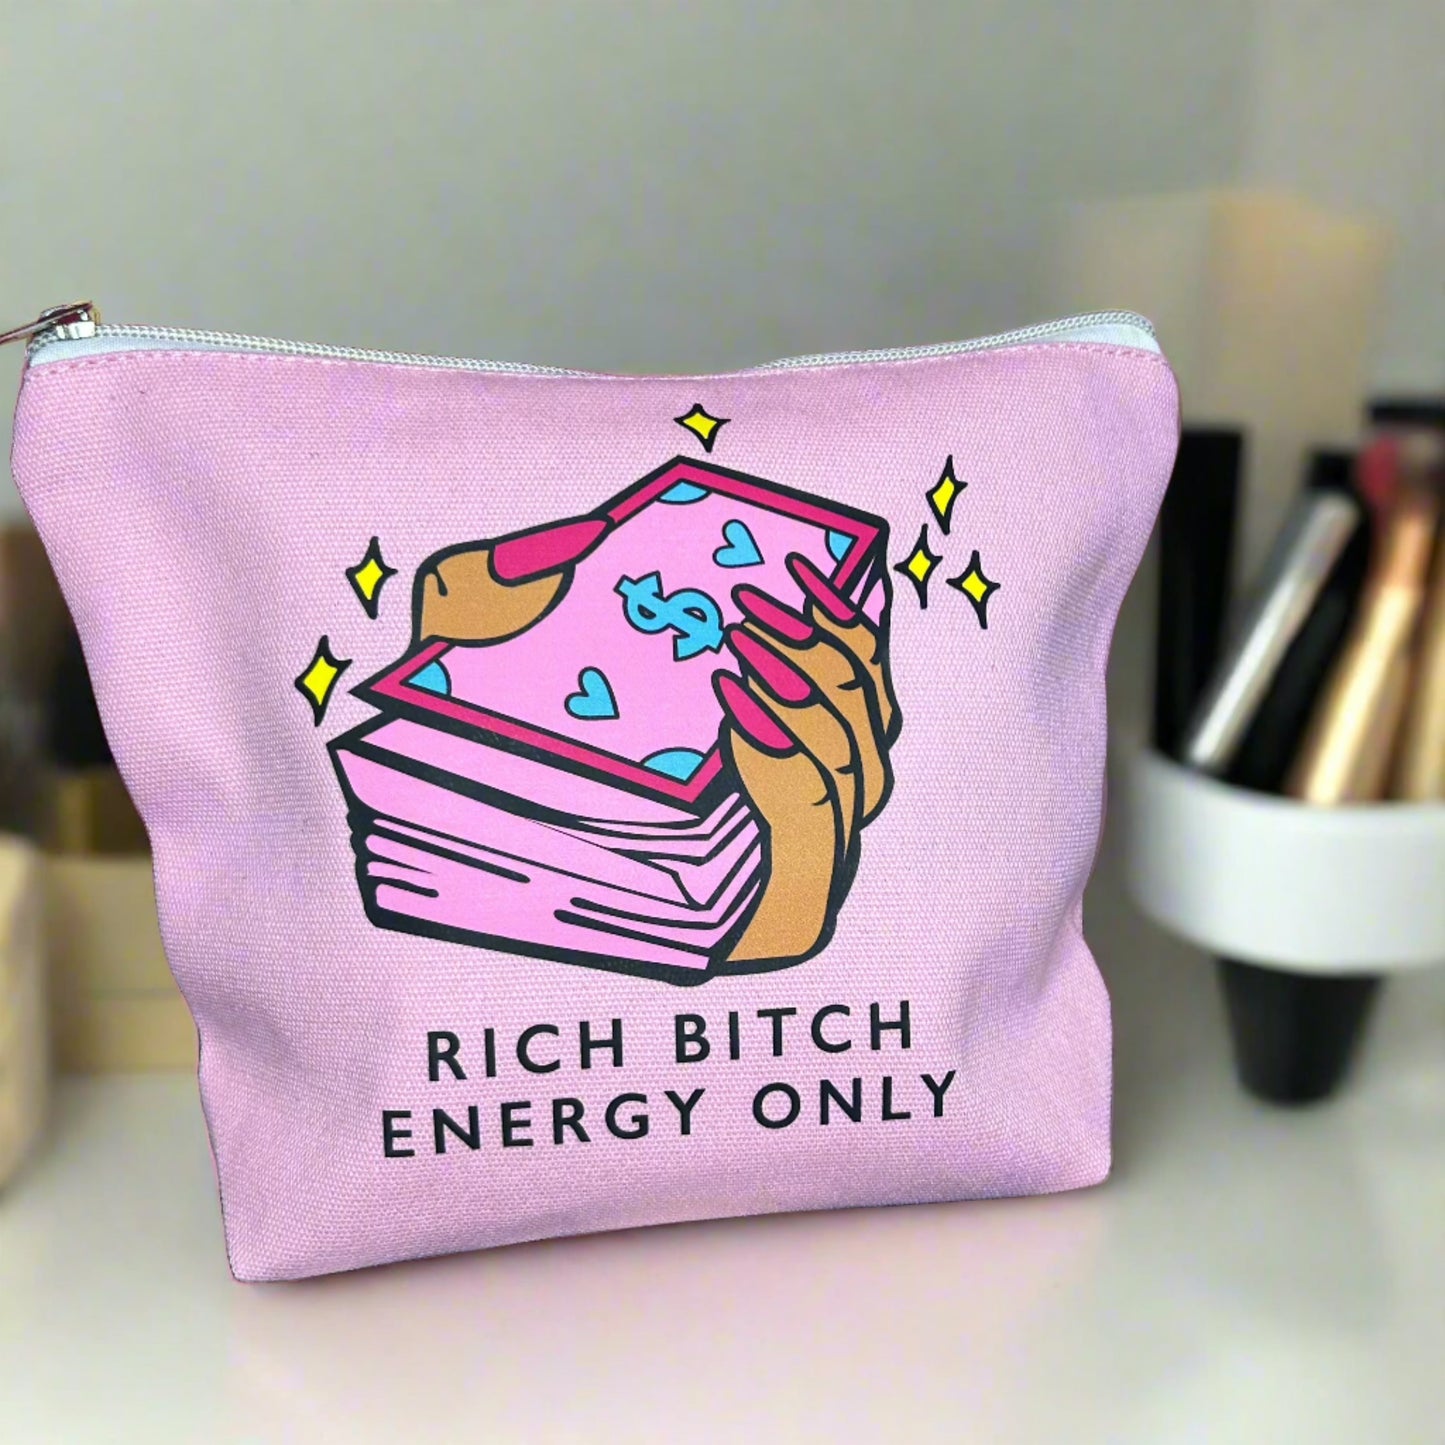 RICH BITCH ENERGY ONLY MAKEUP BAG